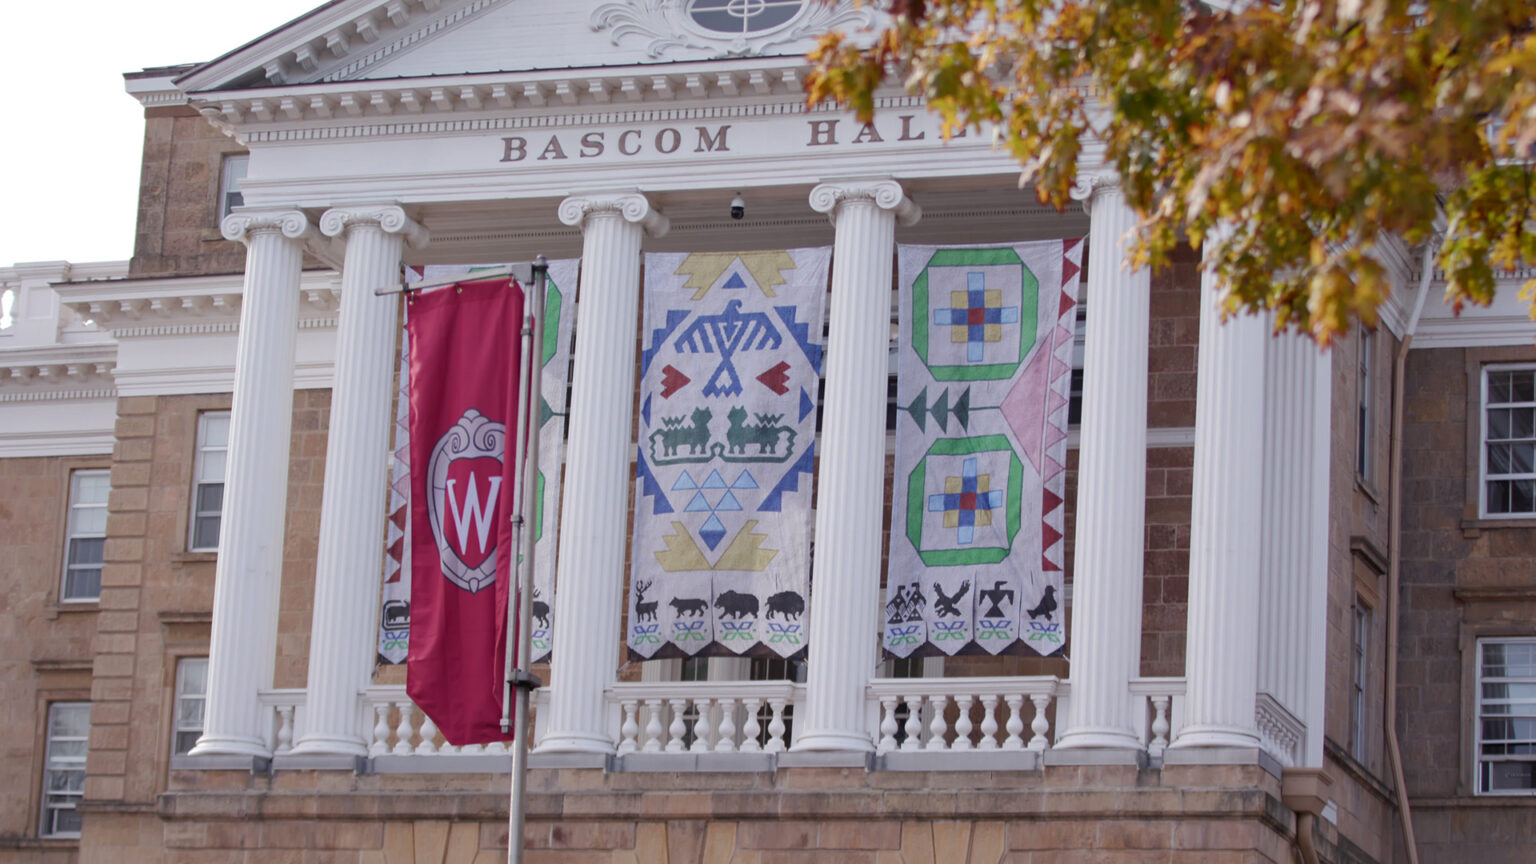 Three banners with different patterns are displayed in between Ionic pillars supporting a pediment at the front of a multi-story building with masonry walls, multi-paned glass windows, with the words Bascom Hall on its face, and with a banner with the UW-Madison crest logo and out-of-focus leaves in the foreground.